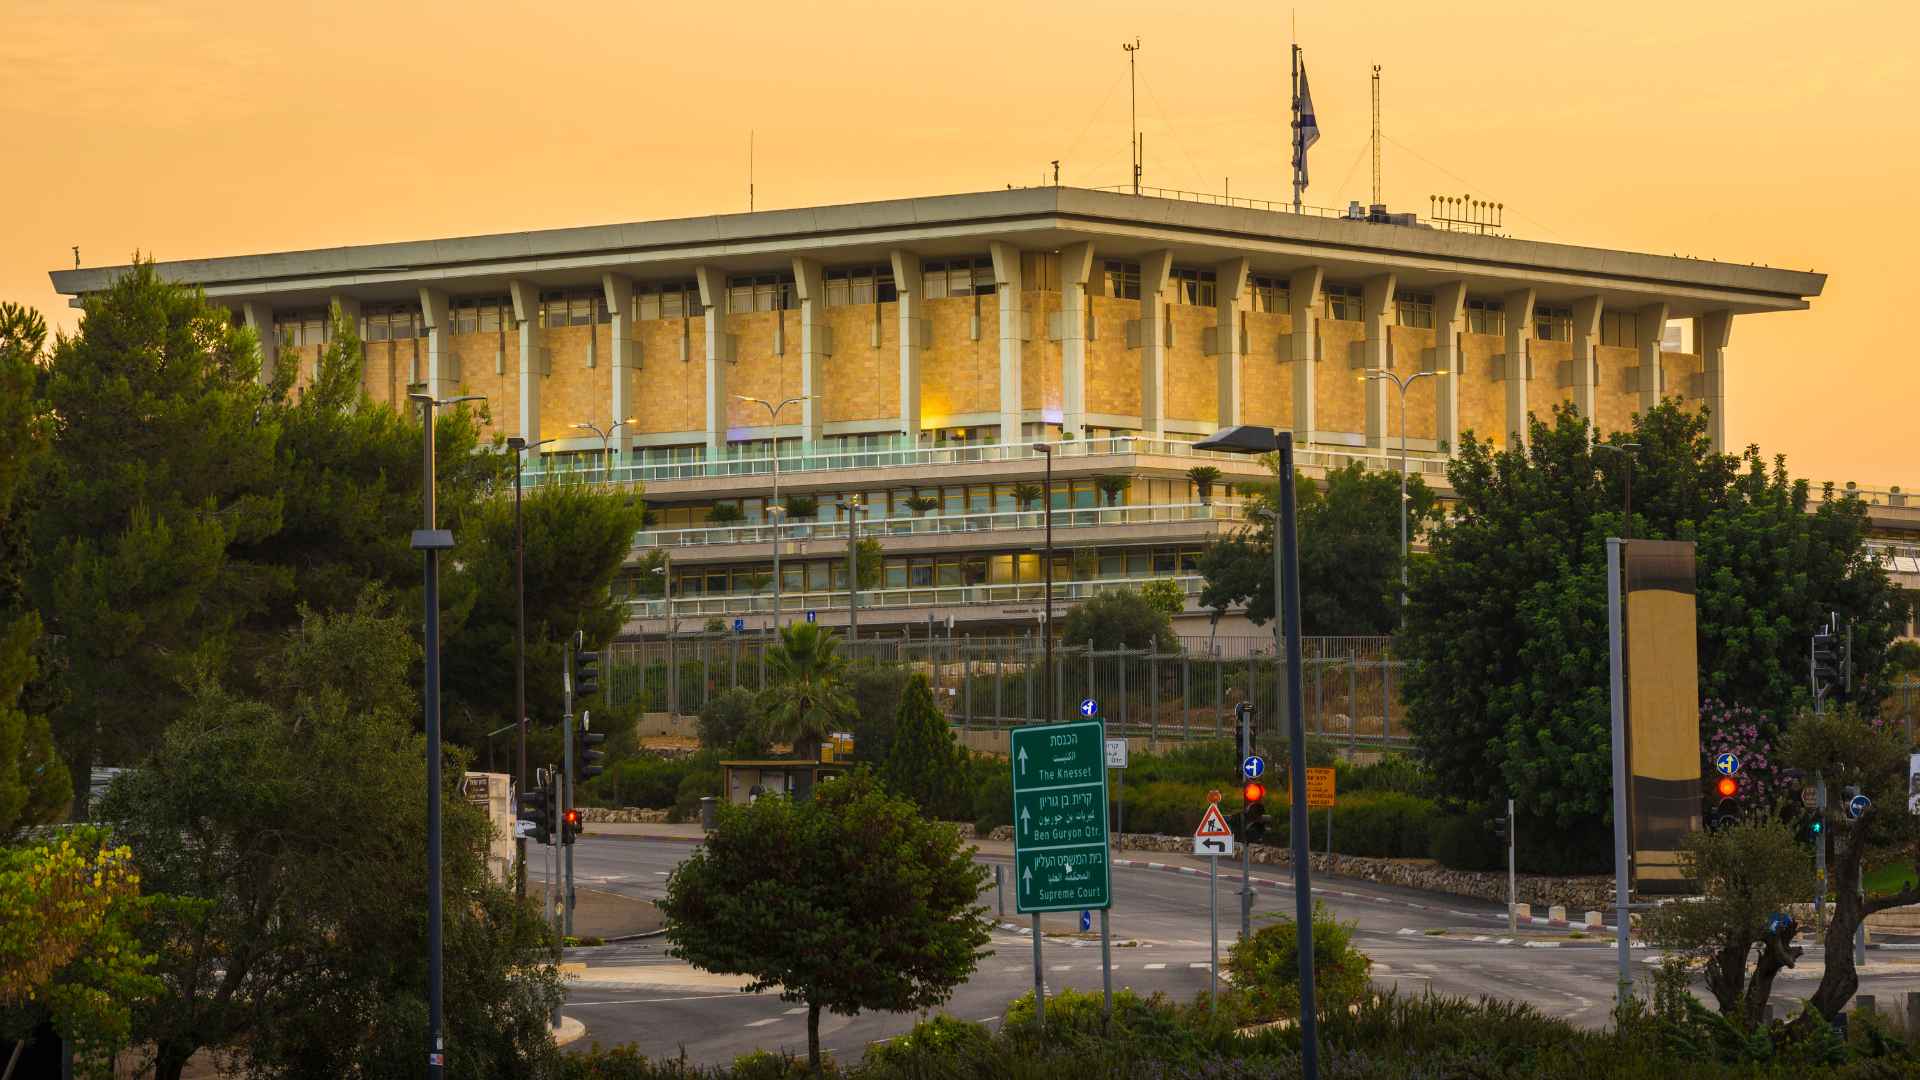 The Knesset - Israel's parliament